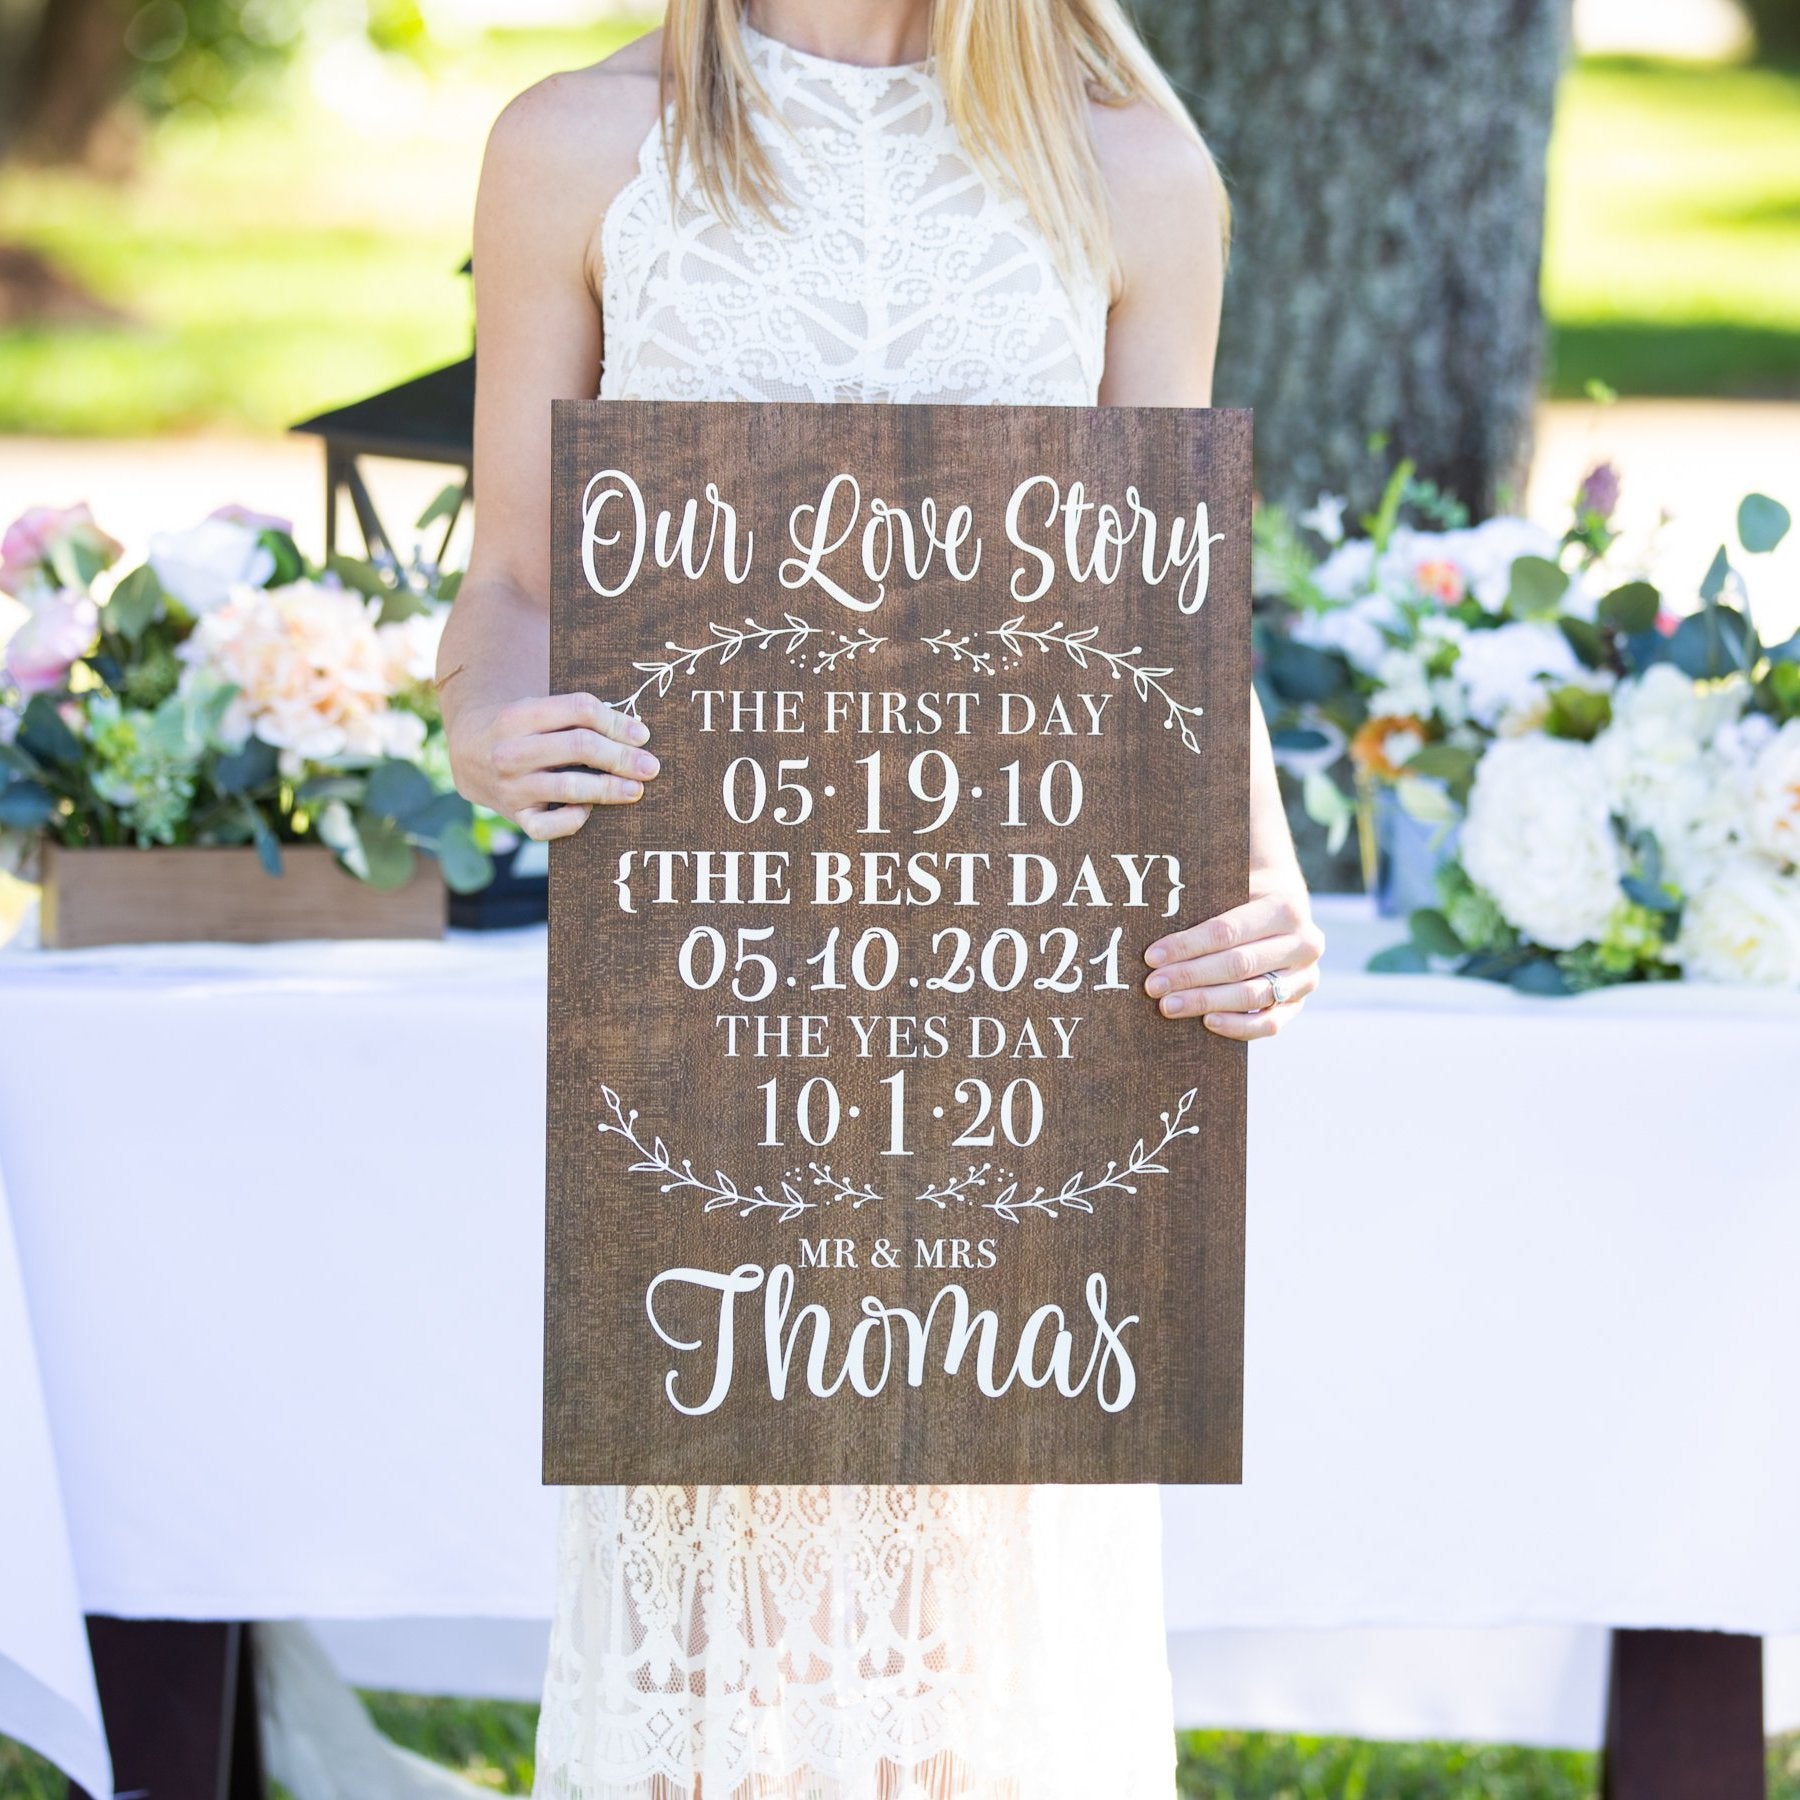 Our Love Story Wedding Sign - Wedding Decor Gifts